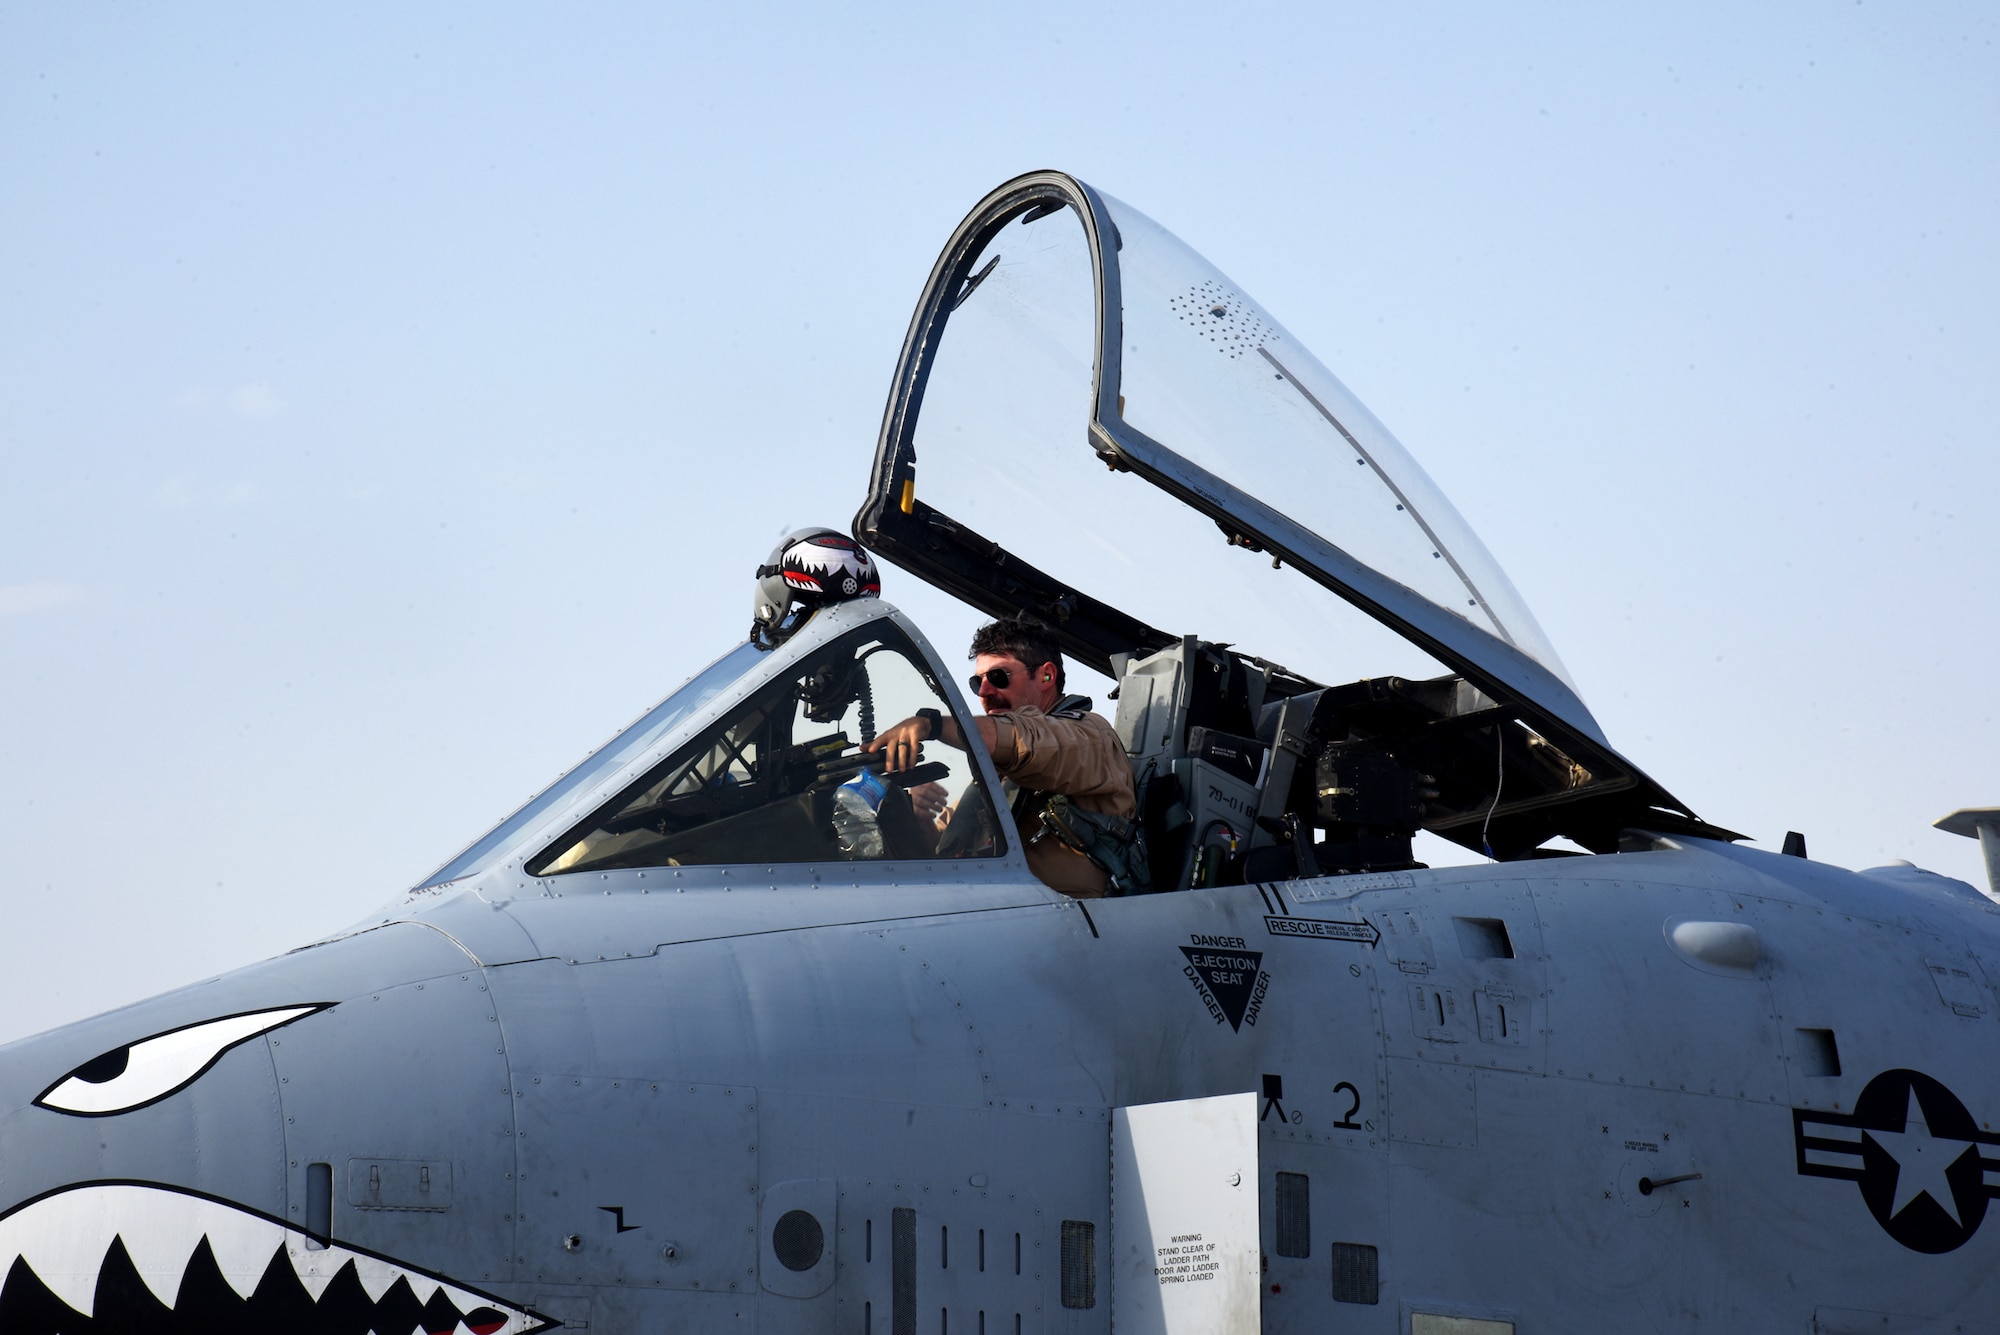 U.S. Air Force Lt. Col. E. Aaron Brady, 75th Expeditionary Fighter Squadron commander, prepares to deplane following his arrival at Al Dhafra Air Base, United Arab Emirates, March 31, 2023. The arrival of the A-10 Thunderbolt IIs in the Middle East provide additional capabilities for U.S. Air Forces Central as well as providing the close air support (CAS) pilots opportunities to build upon their skillsets outside of the U.S. (U.S. Air Force photo by Tech. Sgt. Chris Jacobs/released)